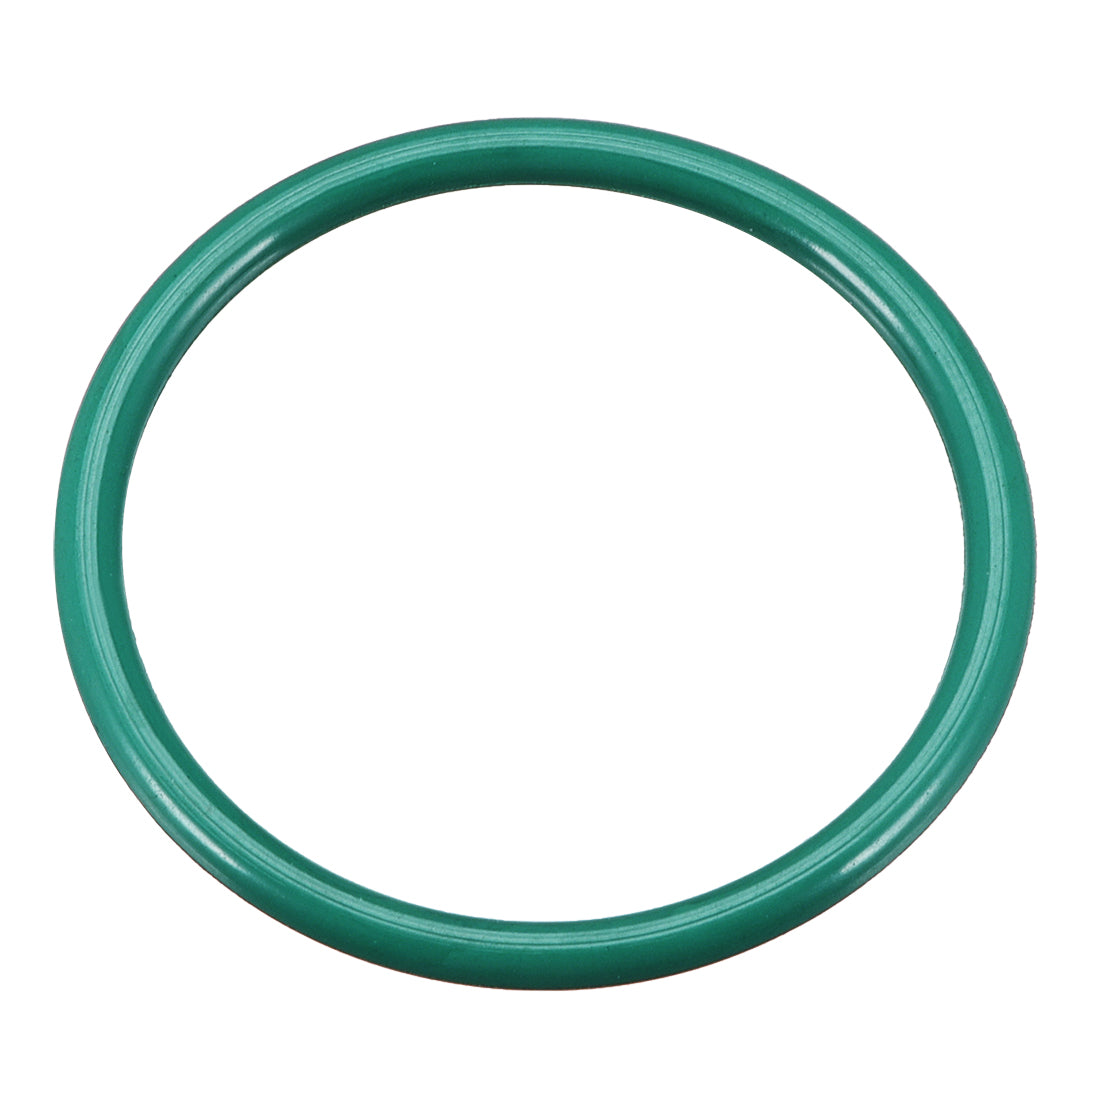 uxcell Uxcell O-Rings Fluorine Rubber 30mm x 35.3mm x 2.65mm Seal Rings Sealing Gasket